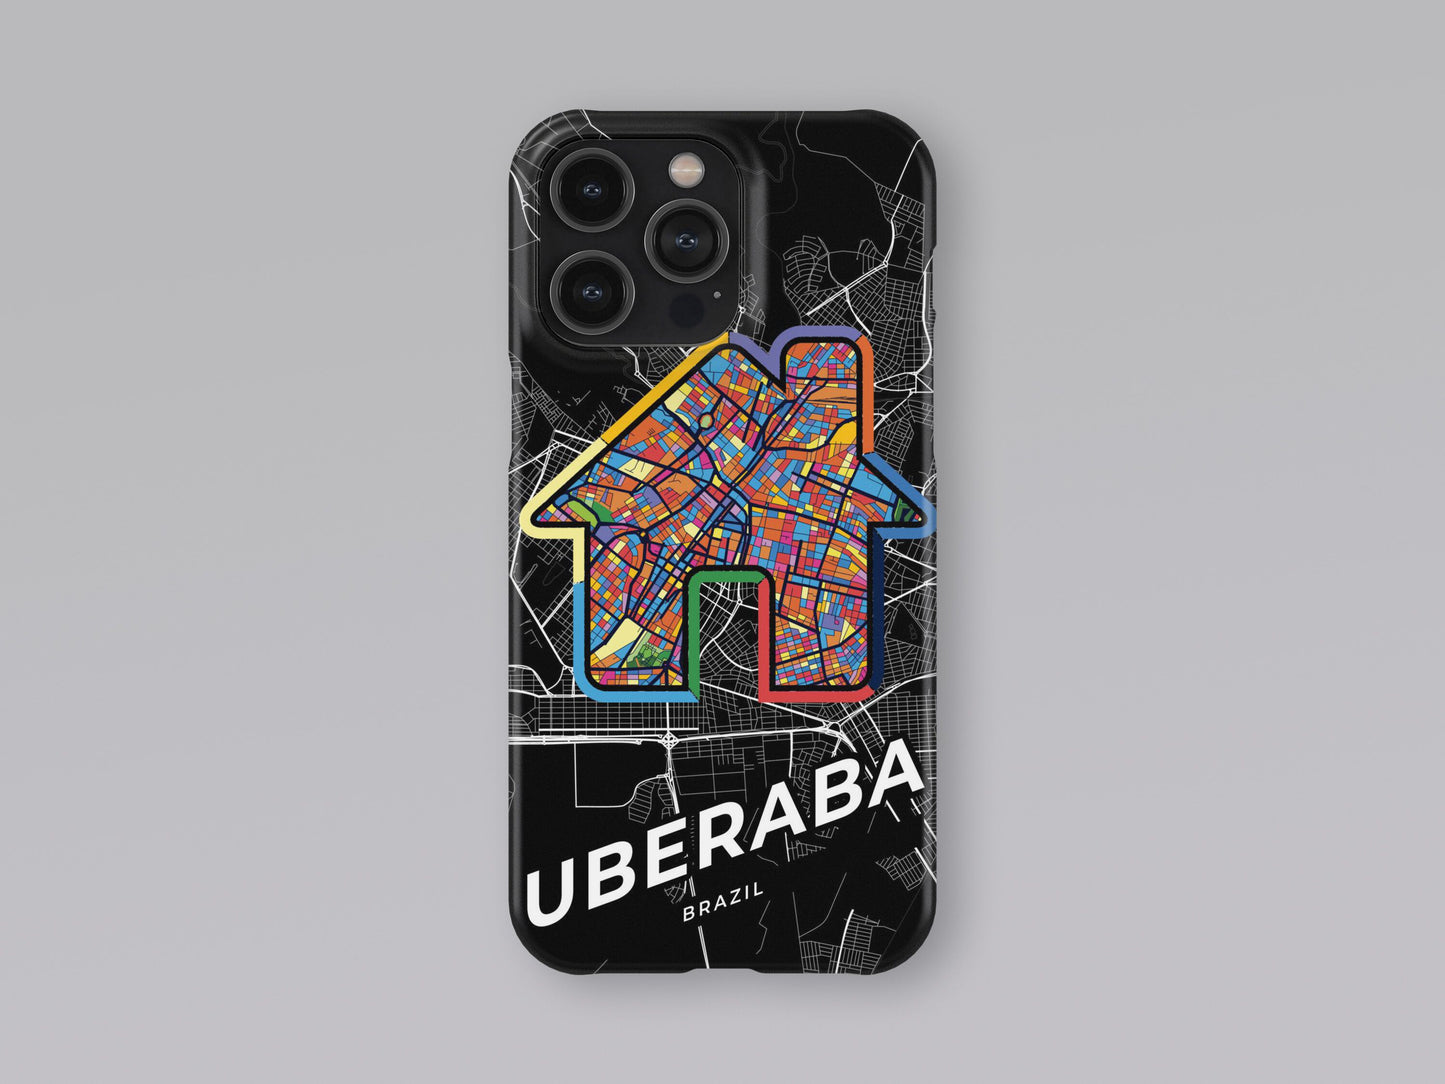 Uberaba Brazil slim phone case with colorful icon. Birthday, wedding or housewarming gift. Couple match cases. 3